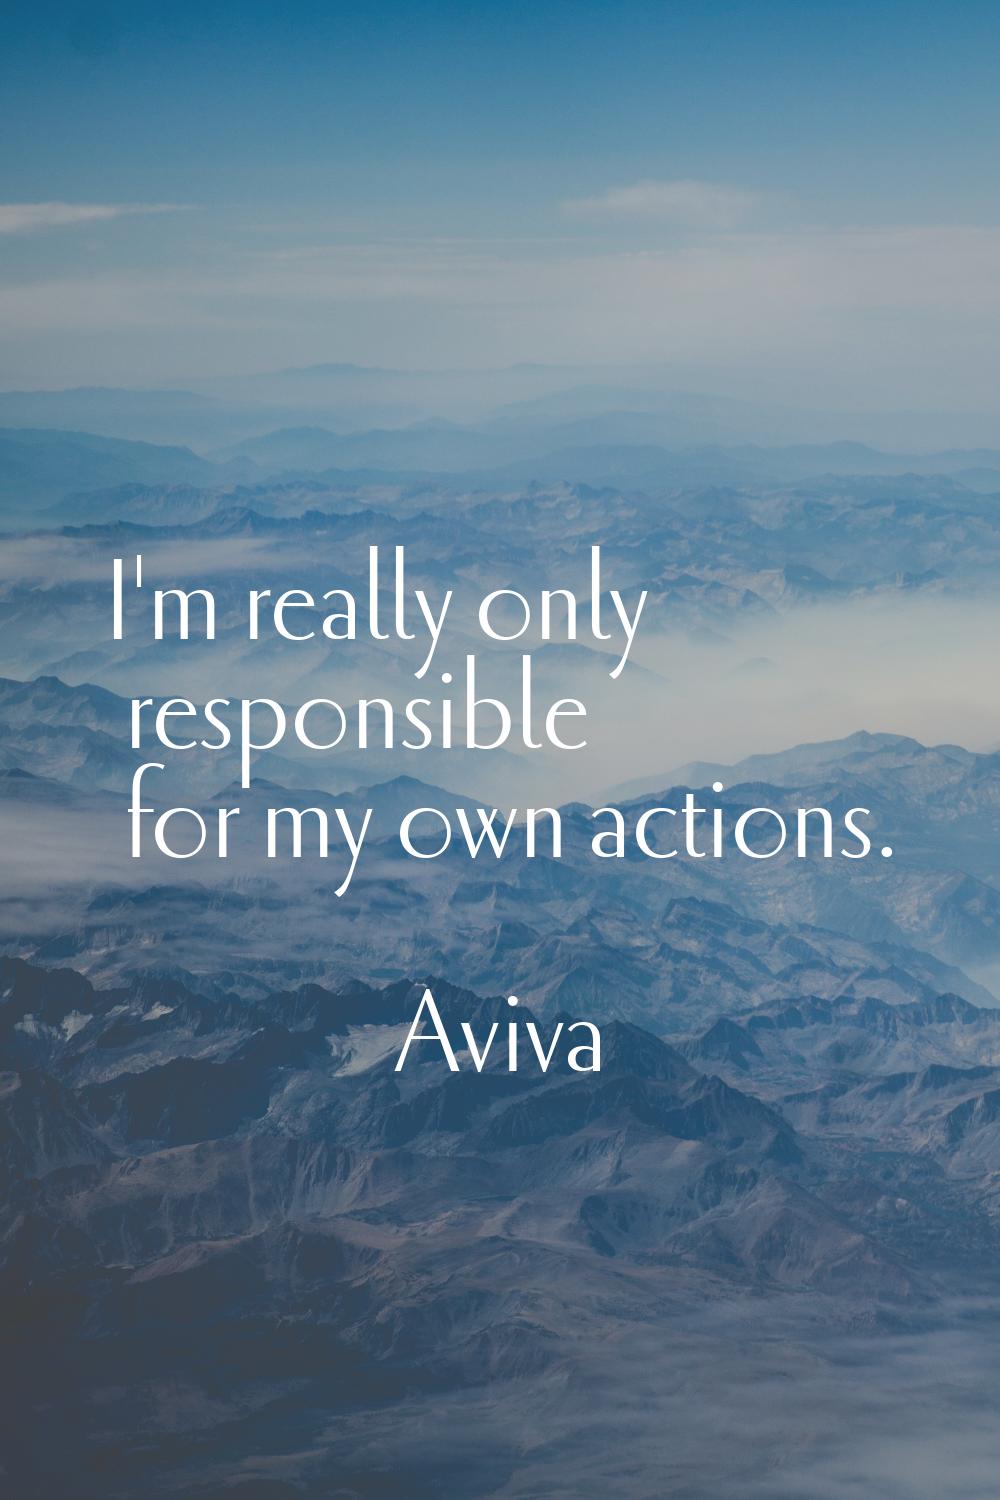 I'm really only responsible for my own actions.